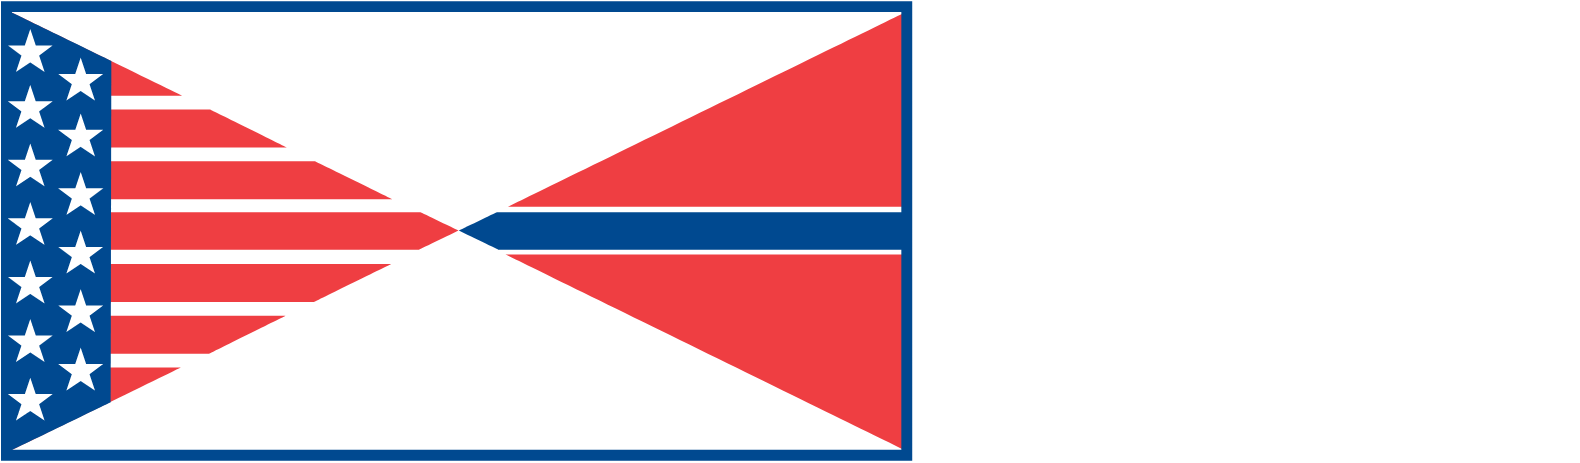 Nordic American Tankers logo large for dark backgrounds (transparent PNG)